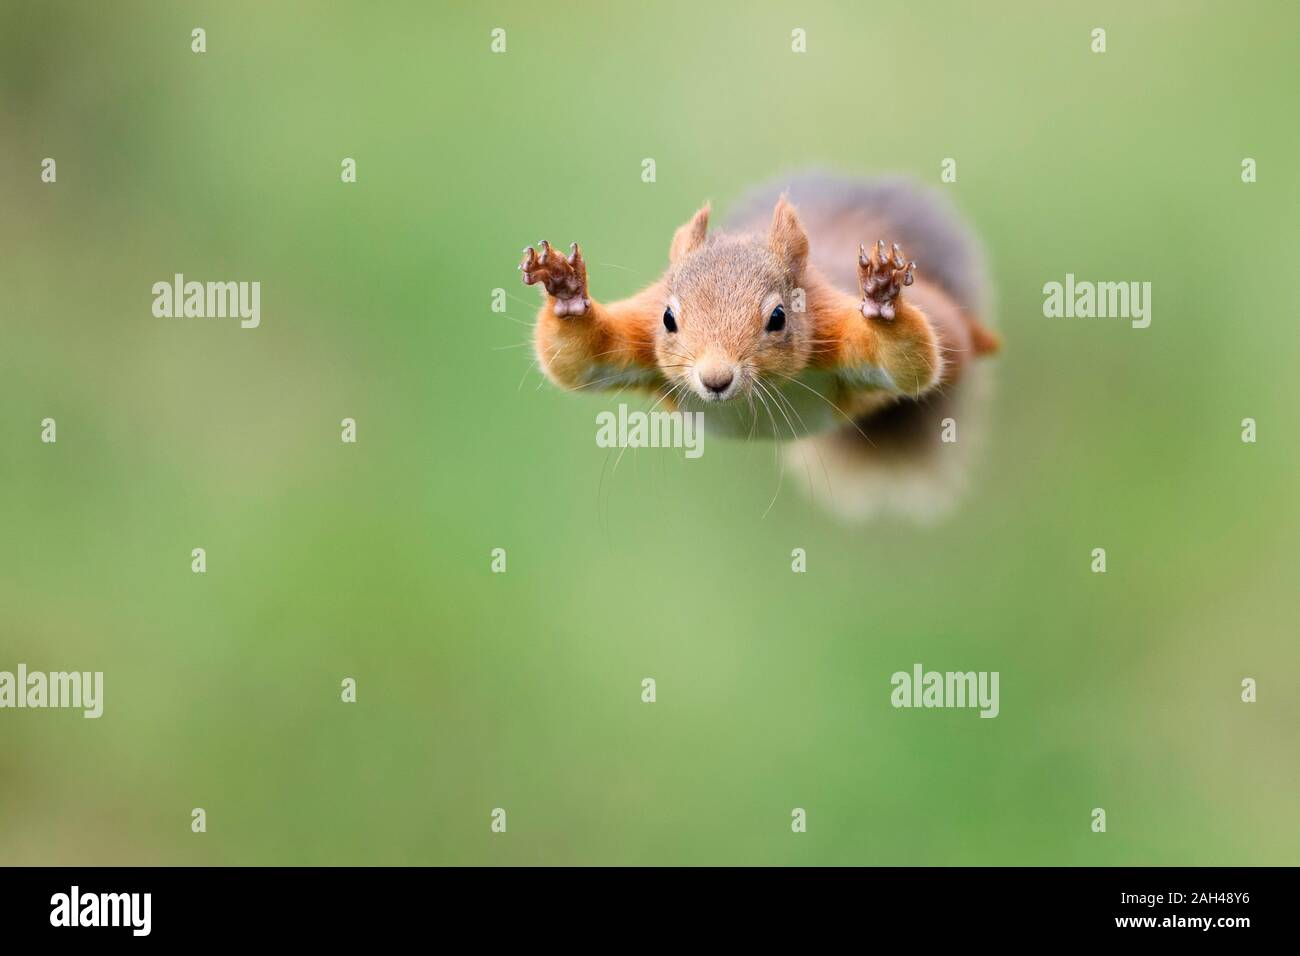 Red Squirrel jumping Stock Photo